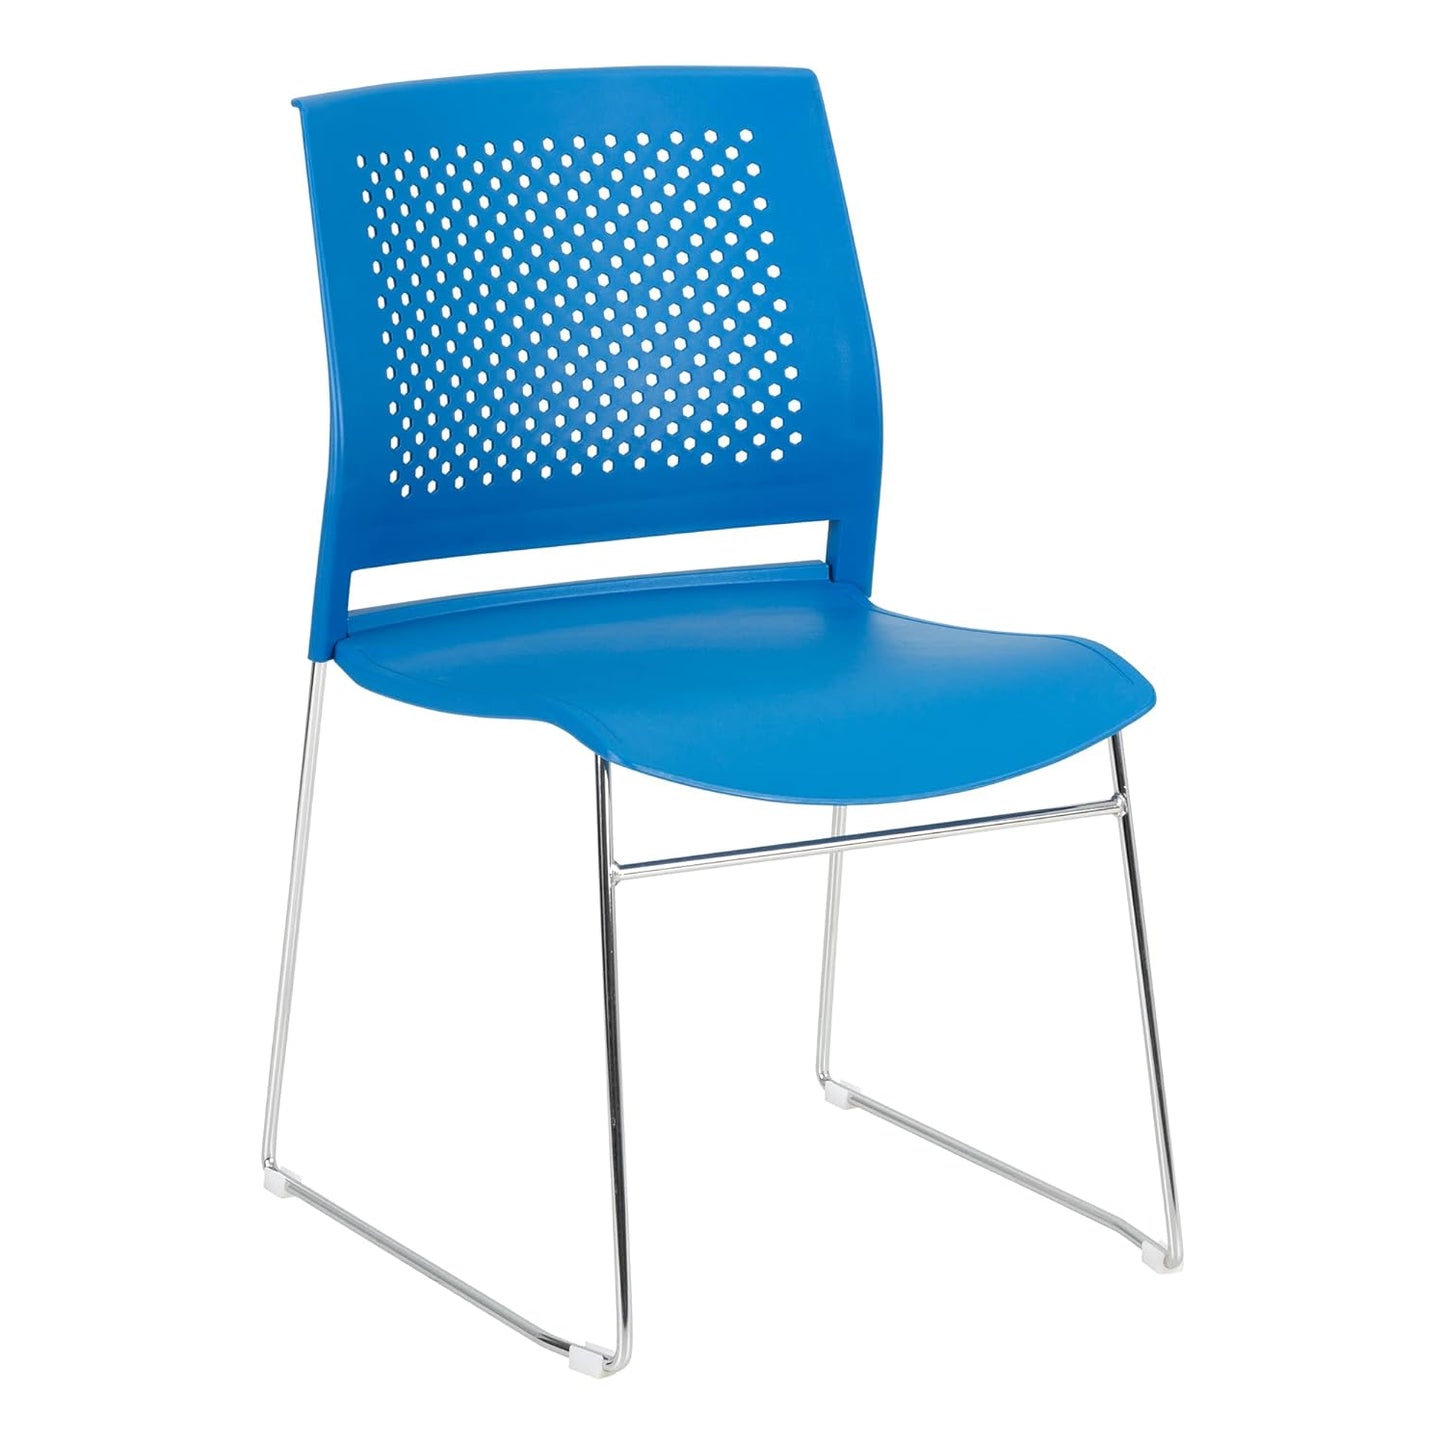 Chrome Sled Base Office Stack Chair with Perforated Seatback (Pack of 5), Brilliant Blue